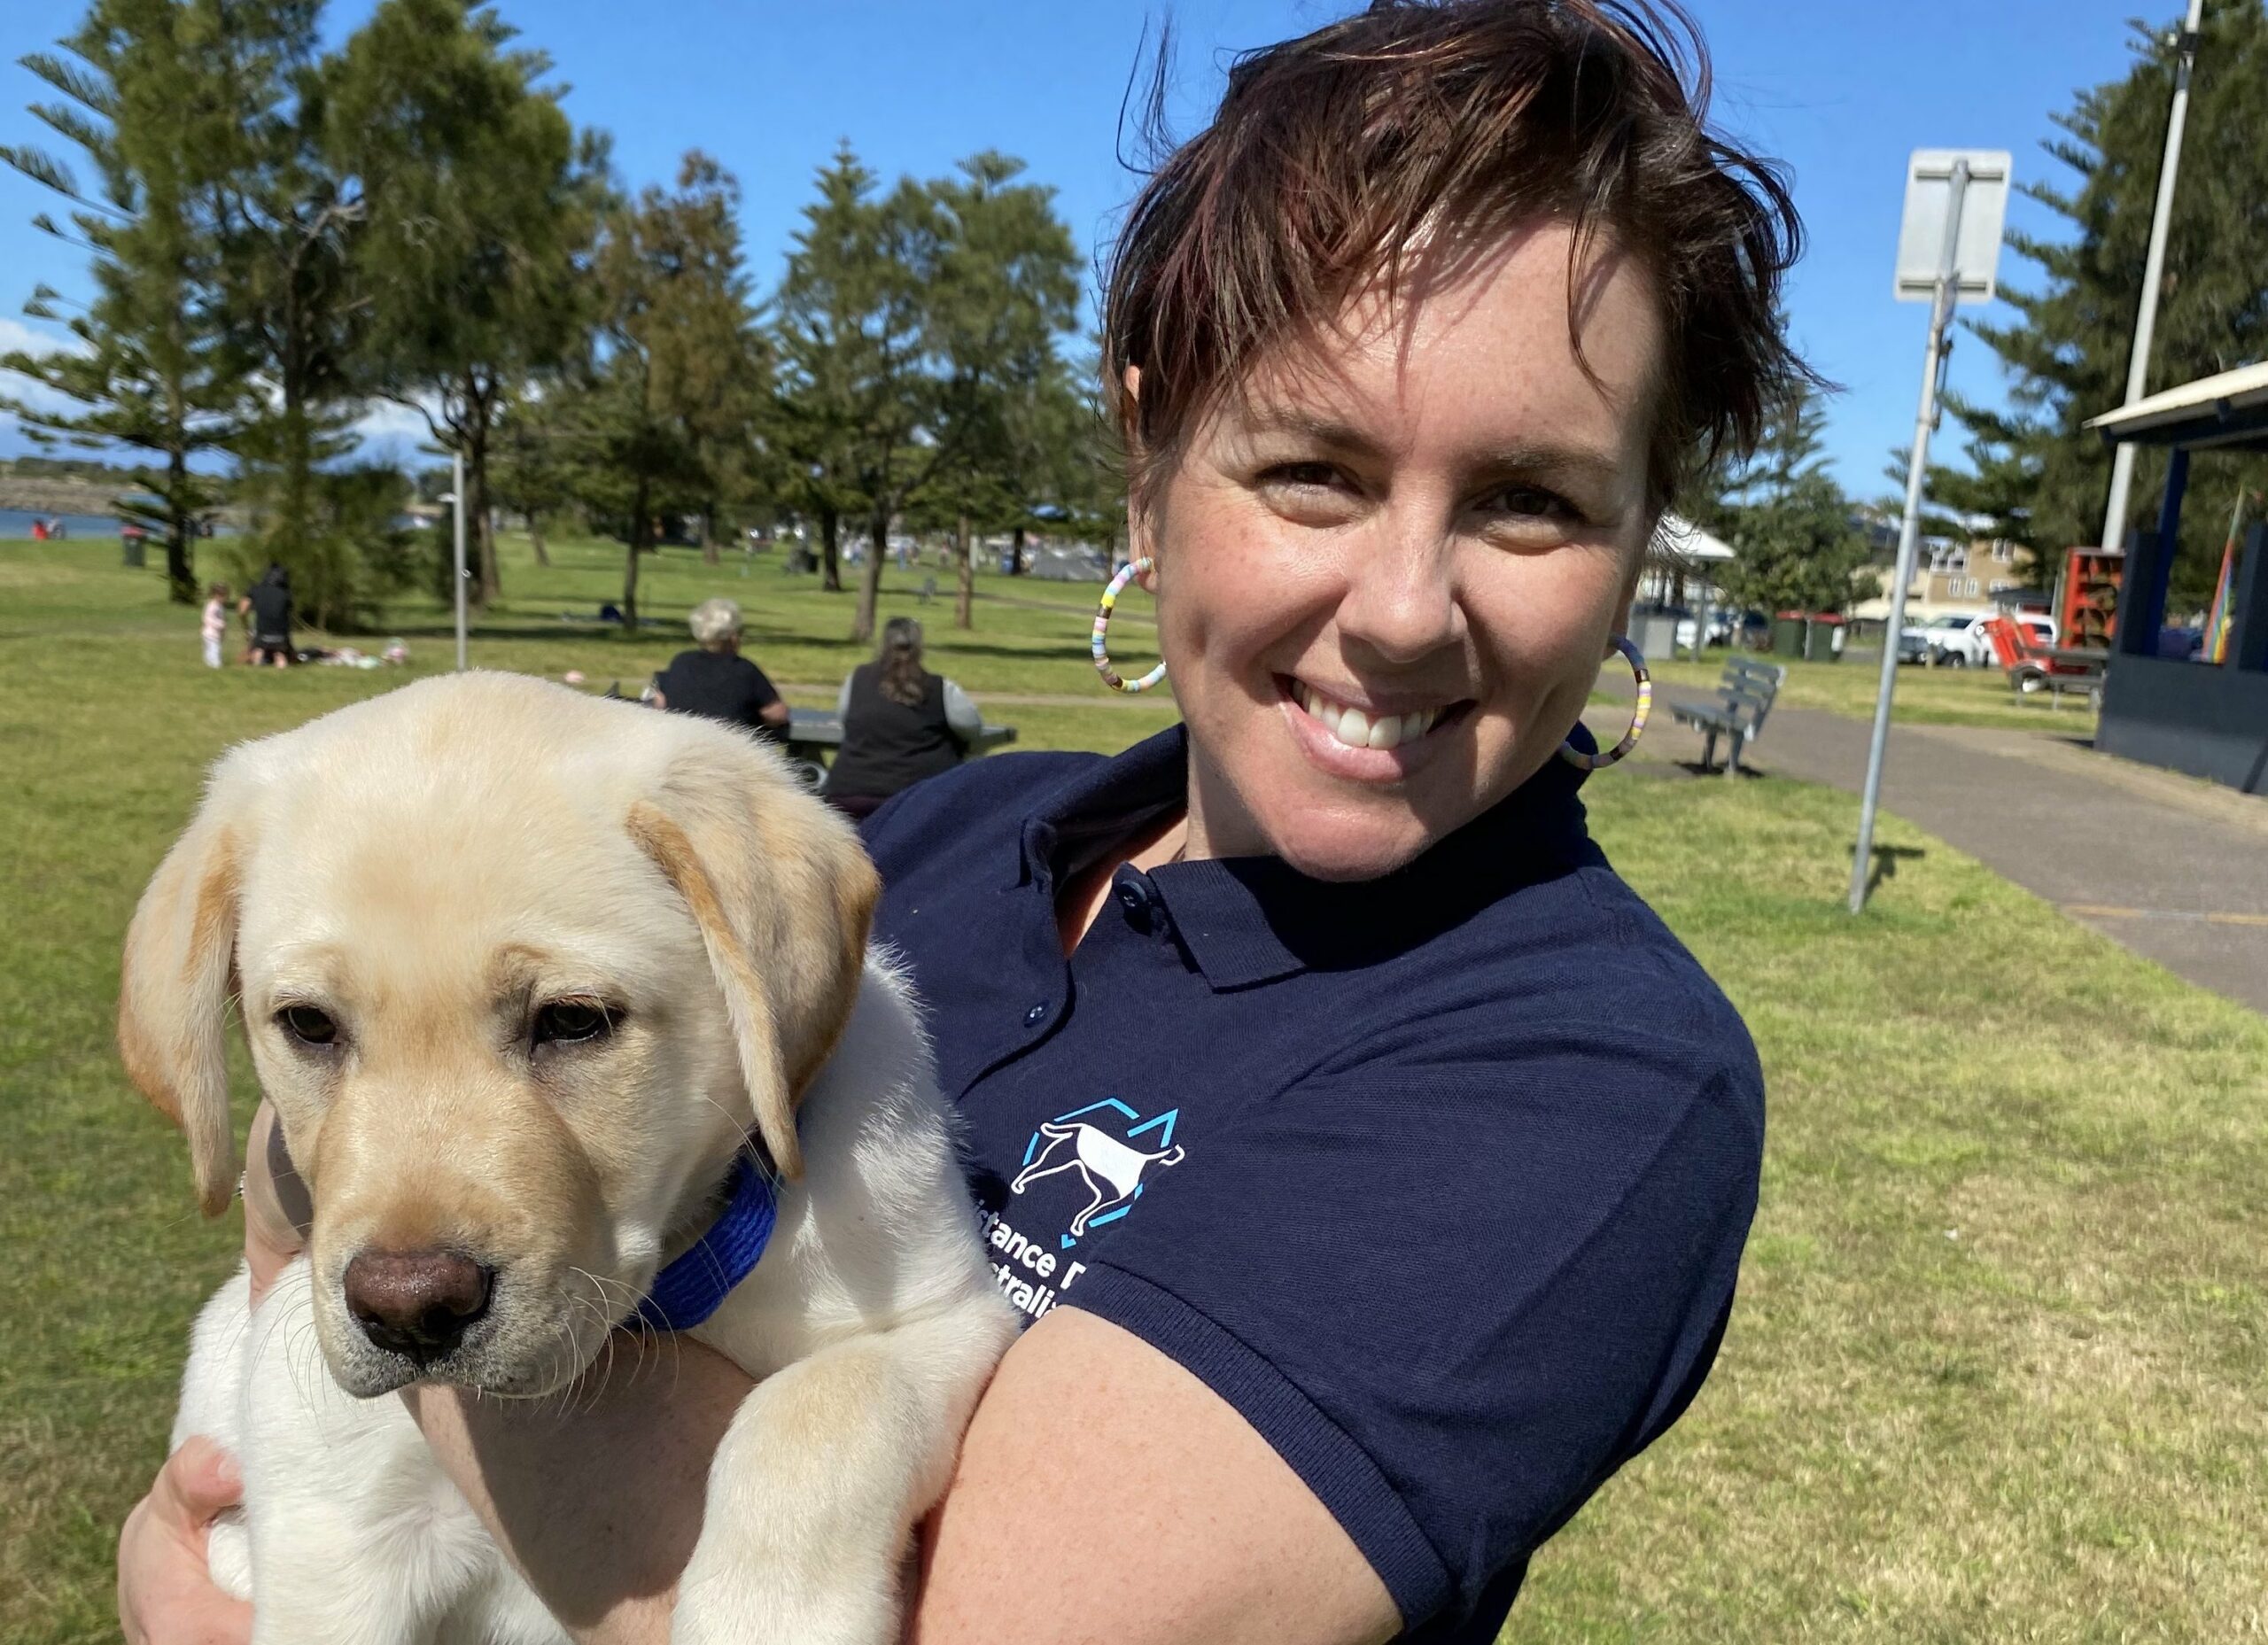 NSW author explores dog therapy for foster children